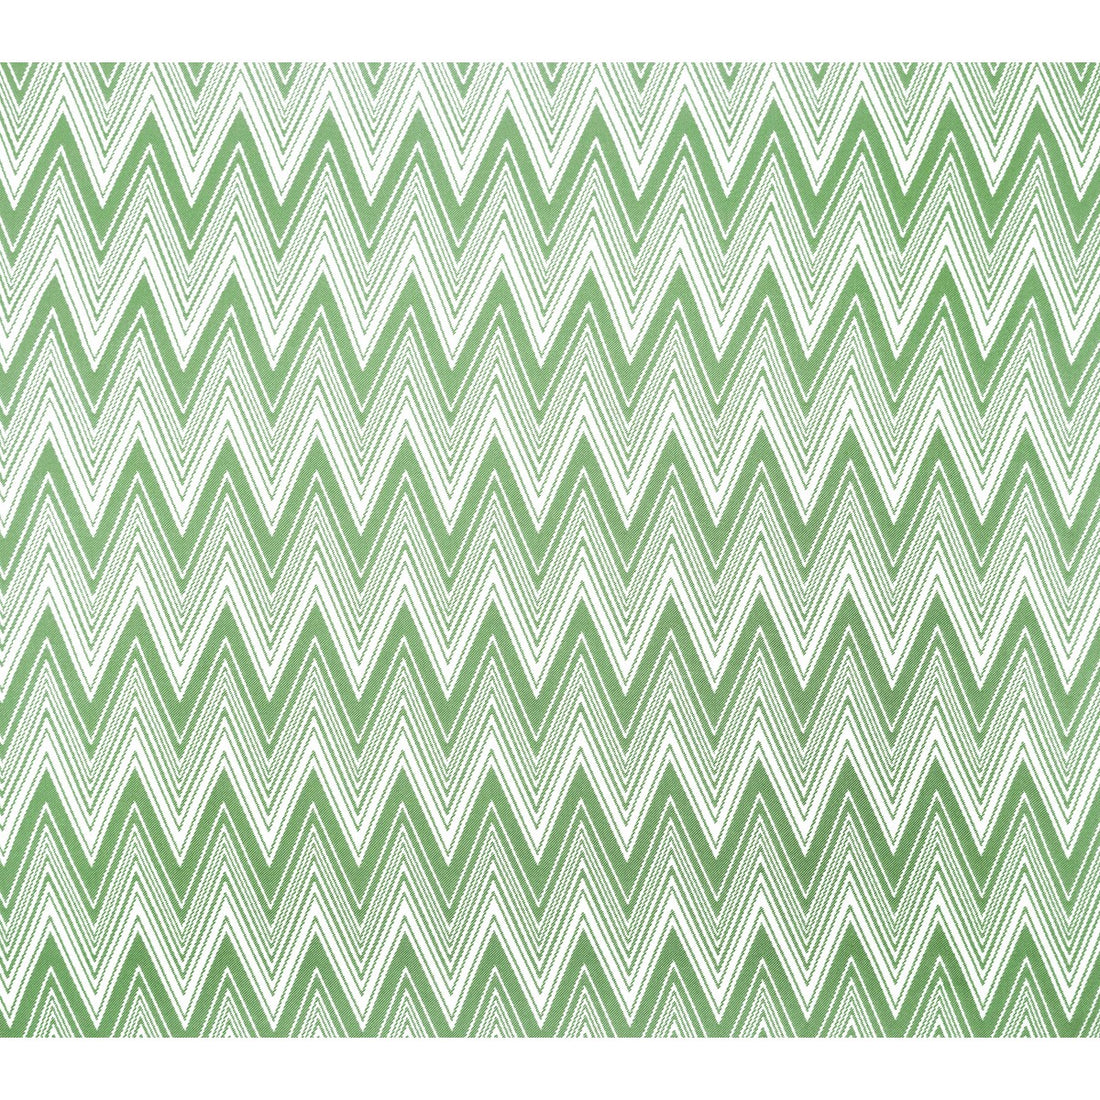 Grace fabric in verde color - pattern GDT5381.8.0 - by Gaston y Daniela in the Gaston Africalia collection